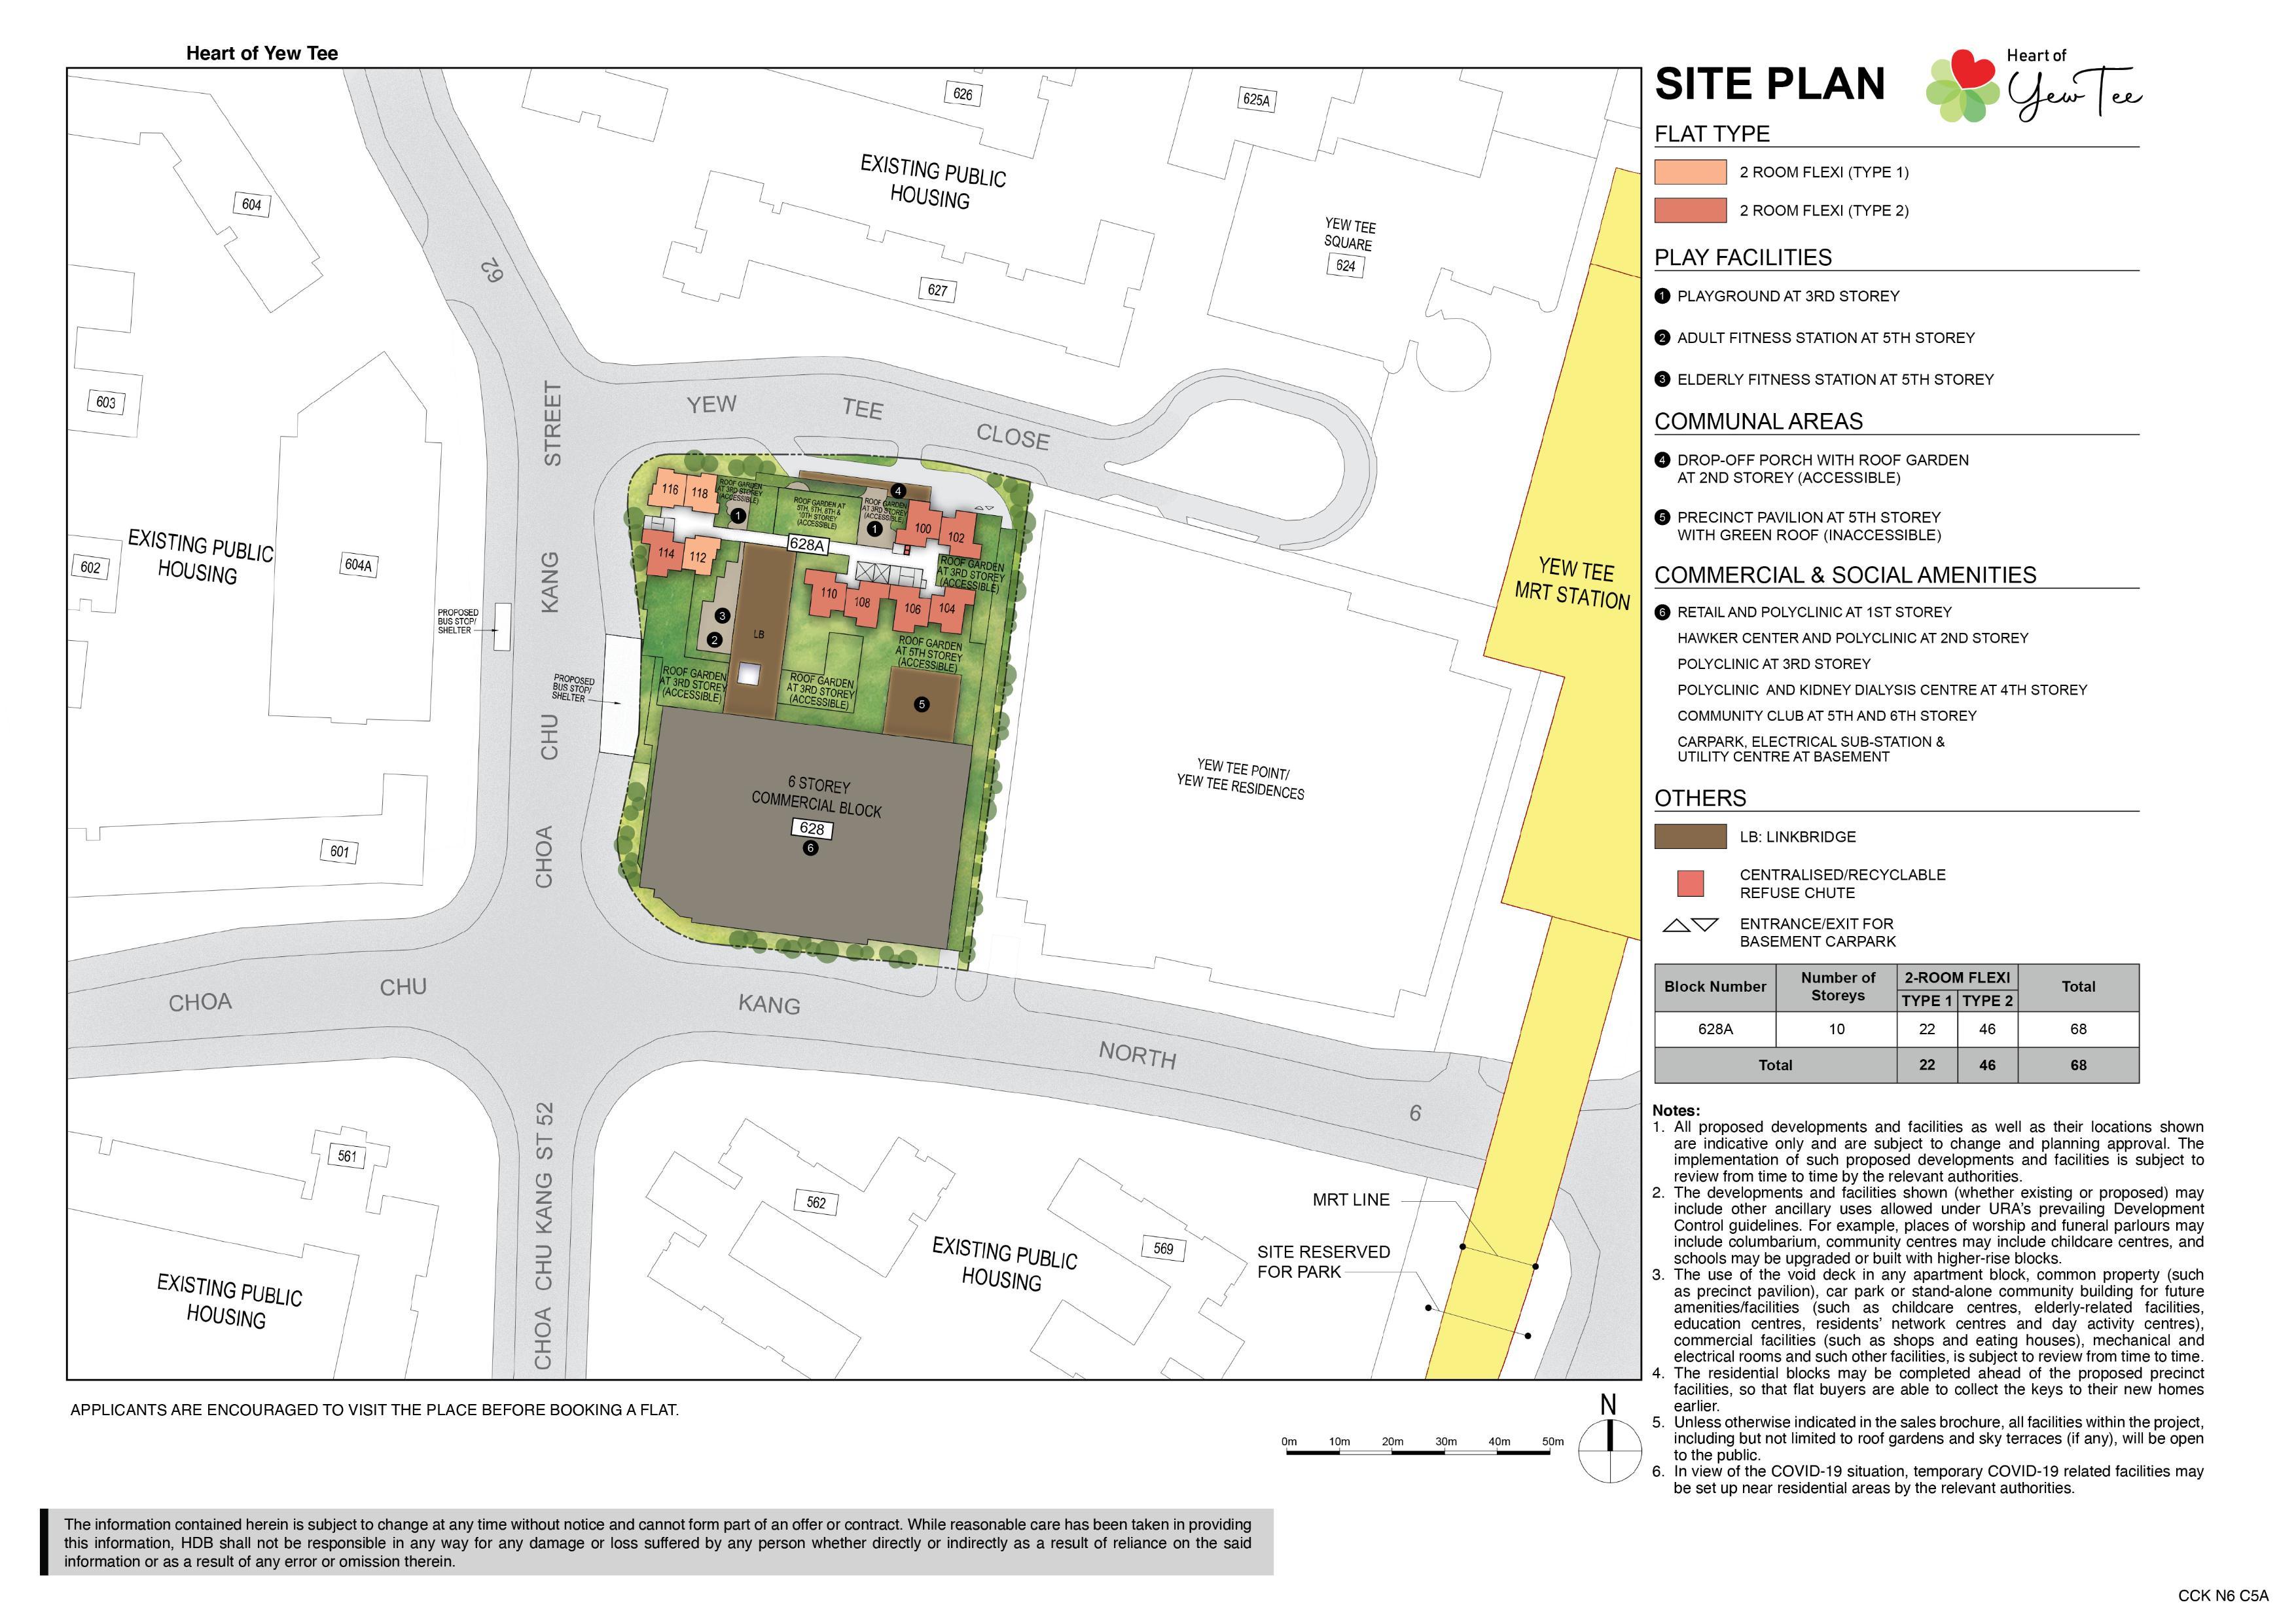 Heart of Yew Tee Site Plan